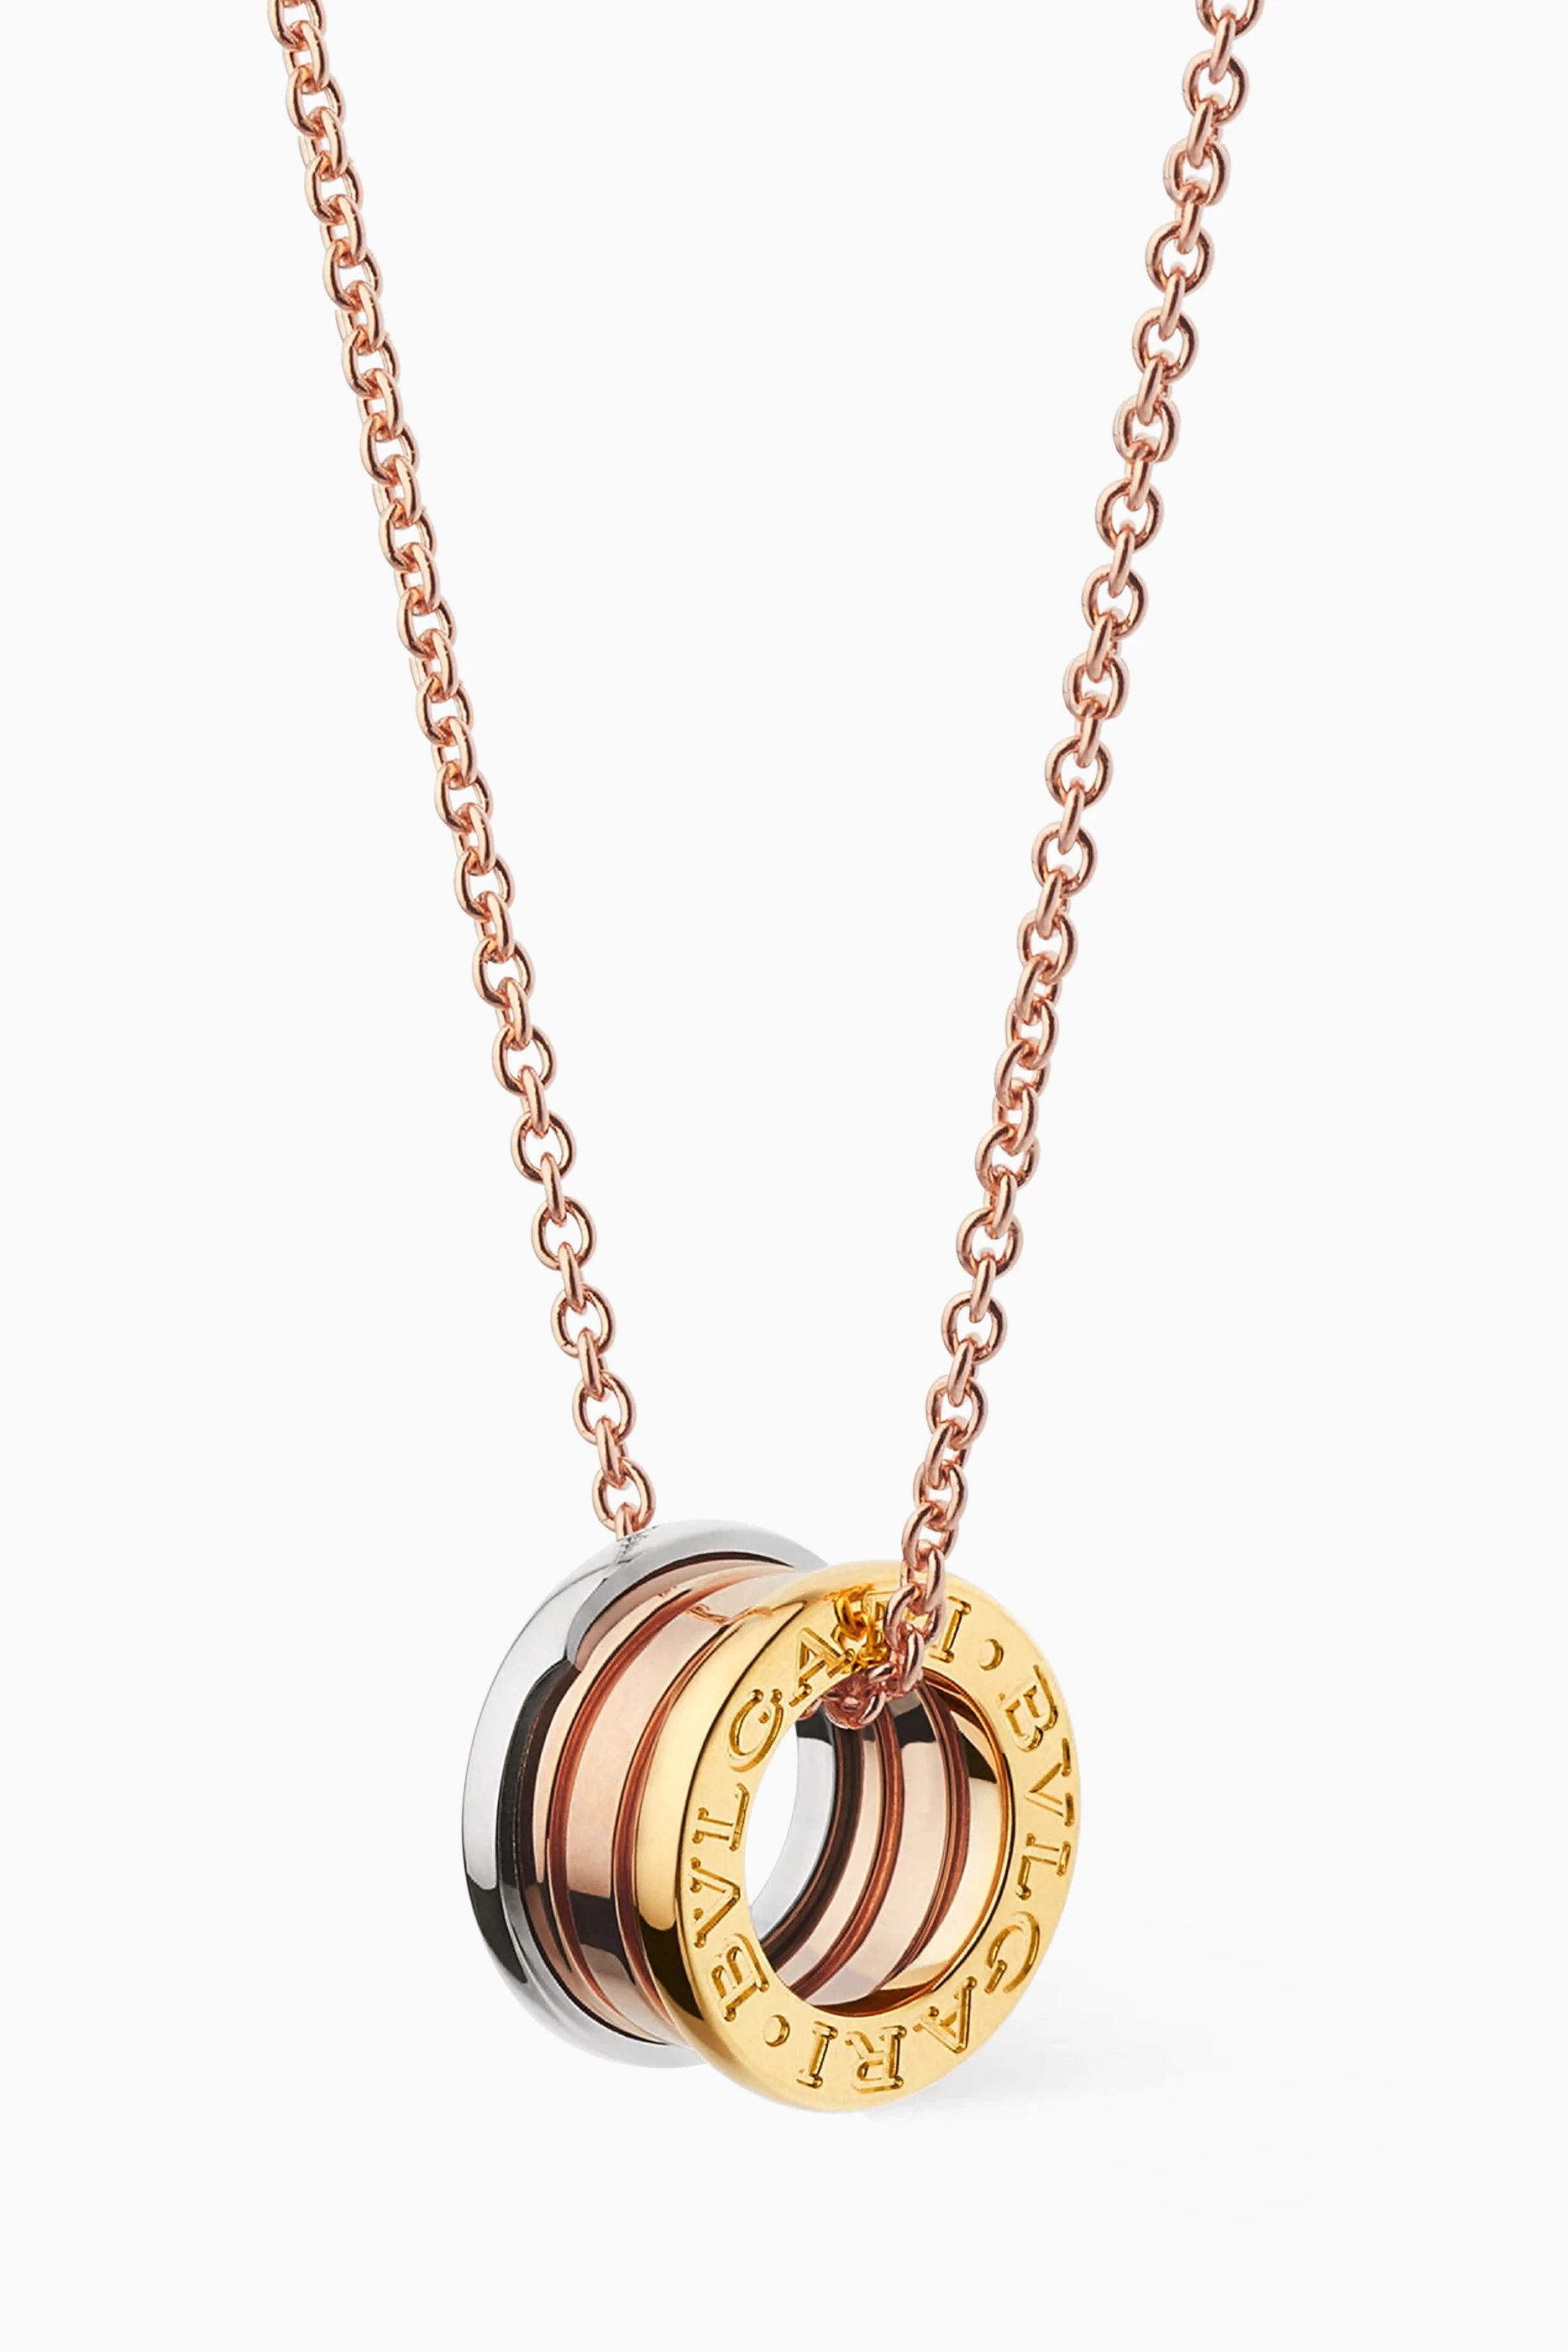 Shop BVLGARI Gold Pink, White & Yellow-Gold  Necklace for WOMEN |  Ounass UAE